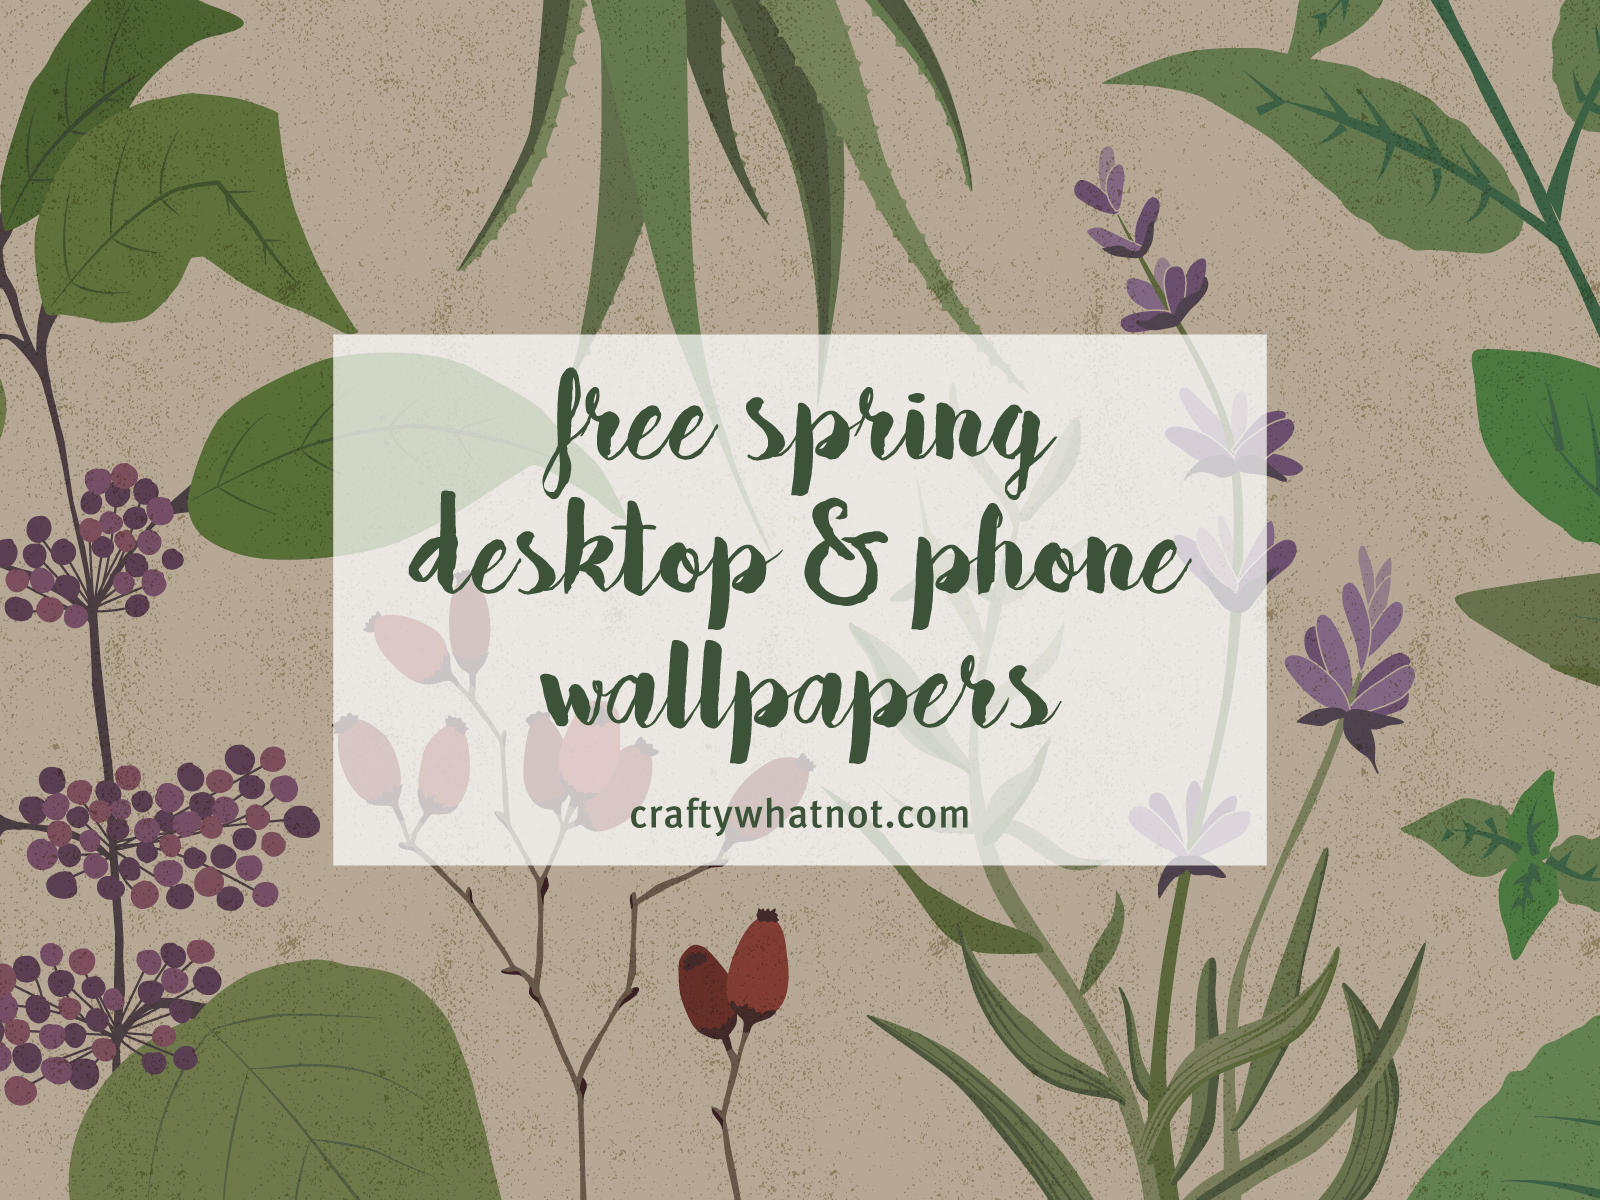 Spring Wallpaper From Crafty Whatnot - Greeting Card - HD Wallpaper 